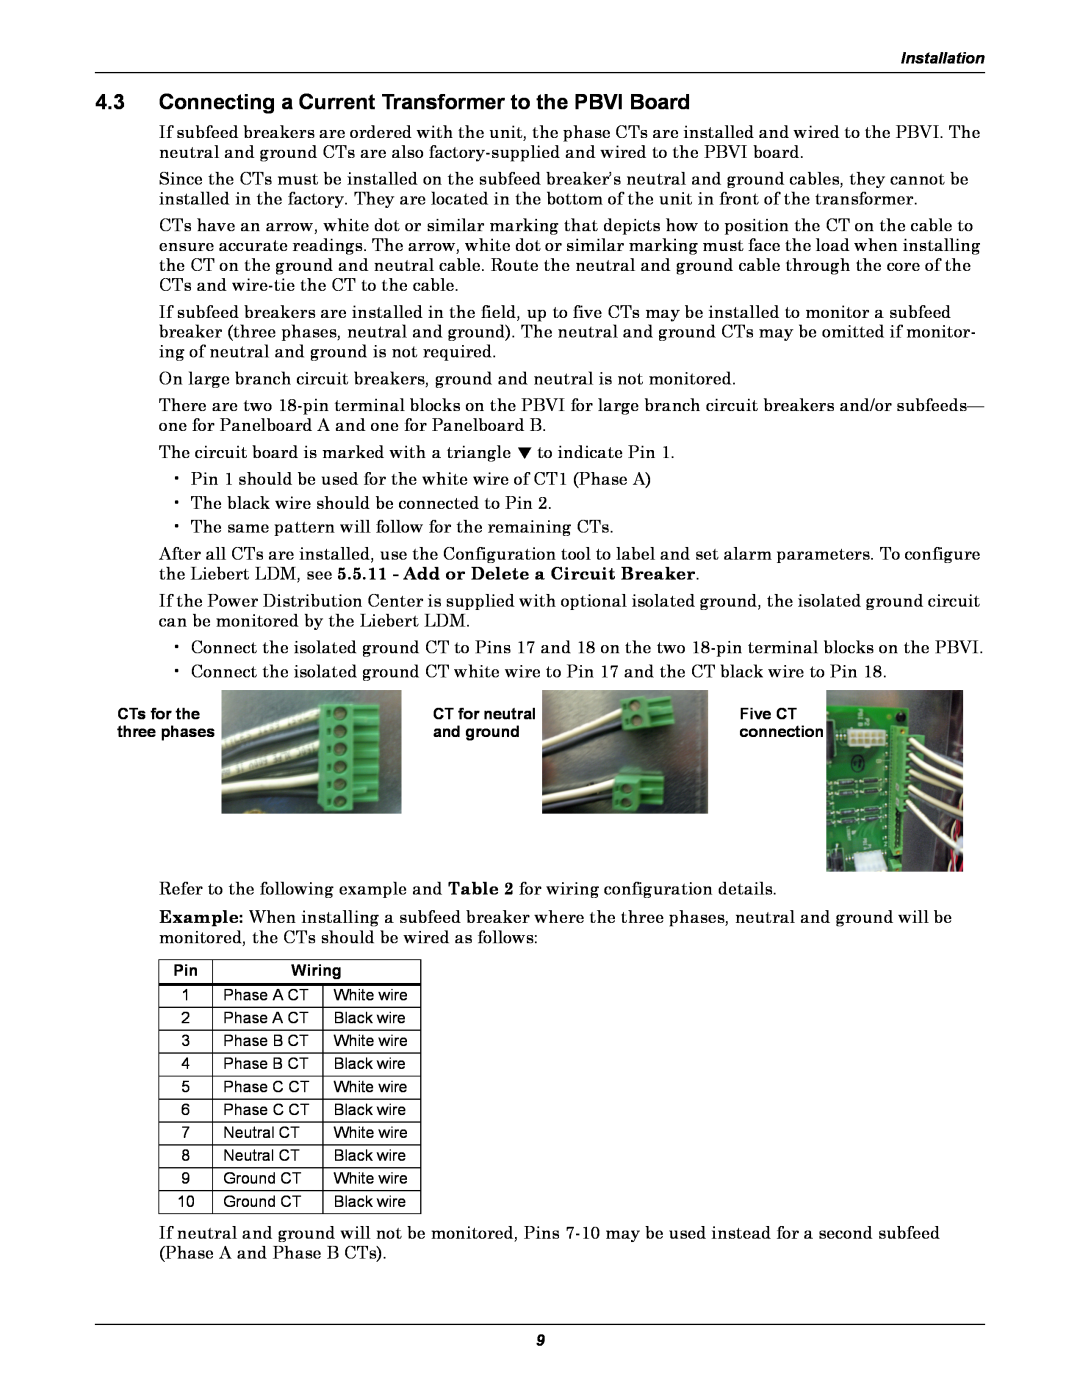 Liebert LDM user manual Connecting a Current Transformer to the PBVI Board 